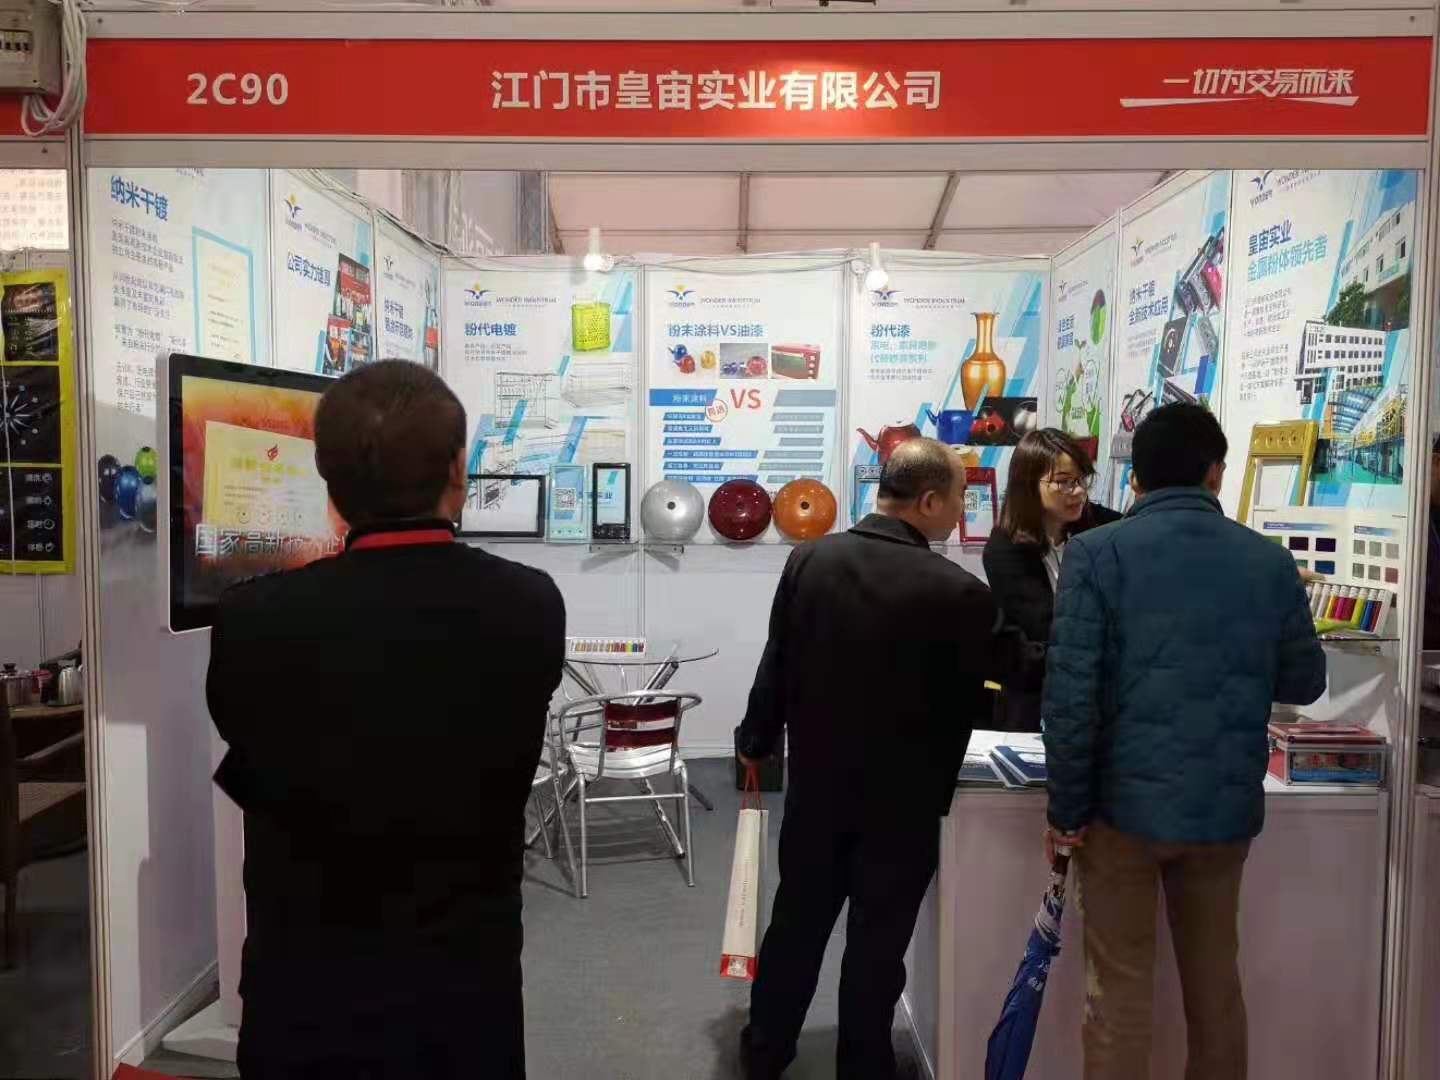 China small Household Appliances Fair and China Household Products Fair (2019.3.7-9)